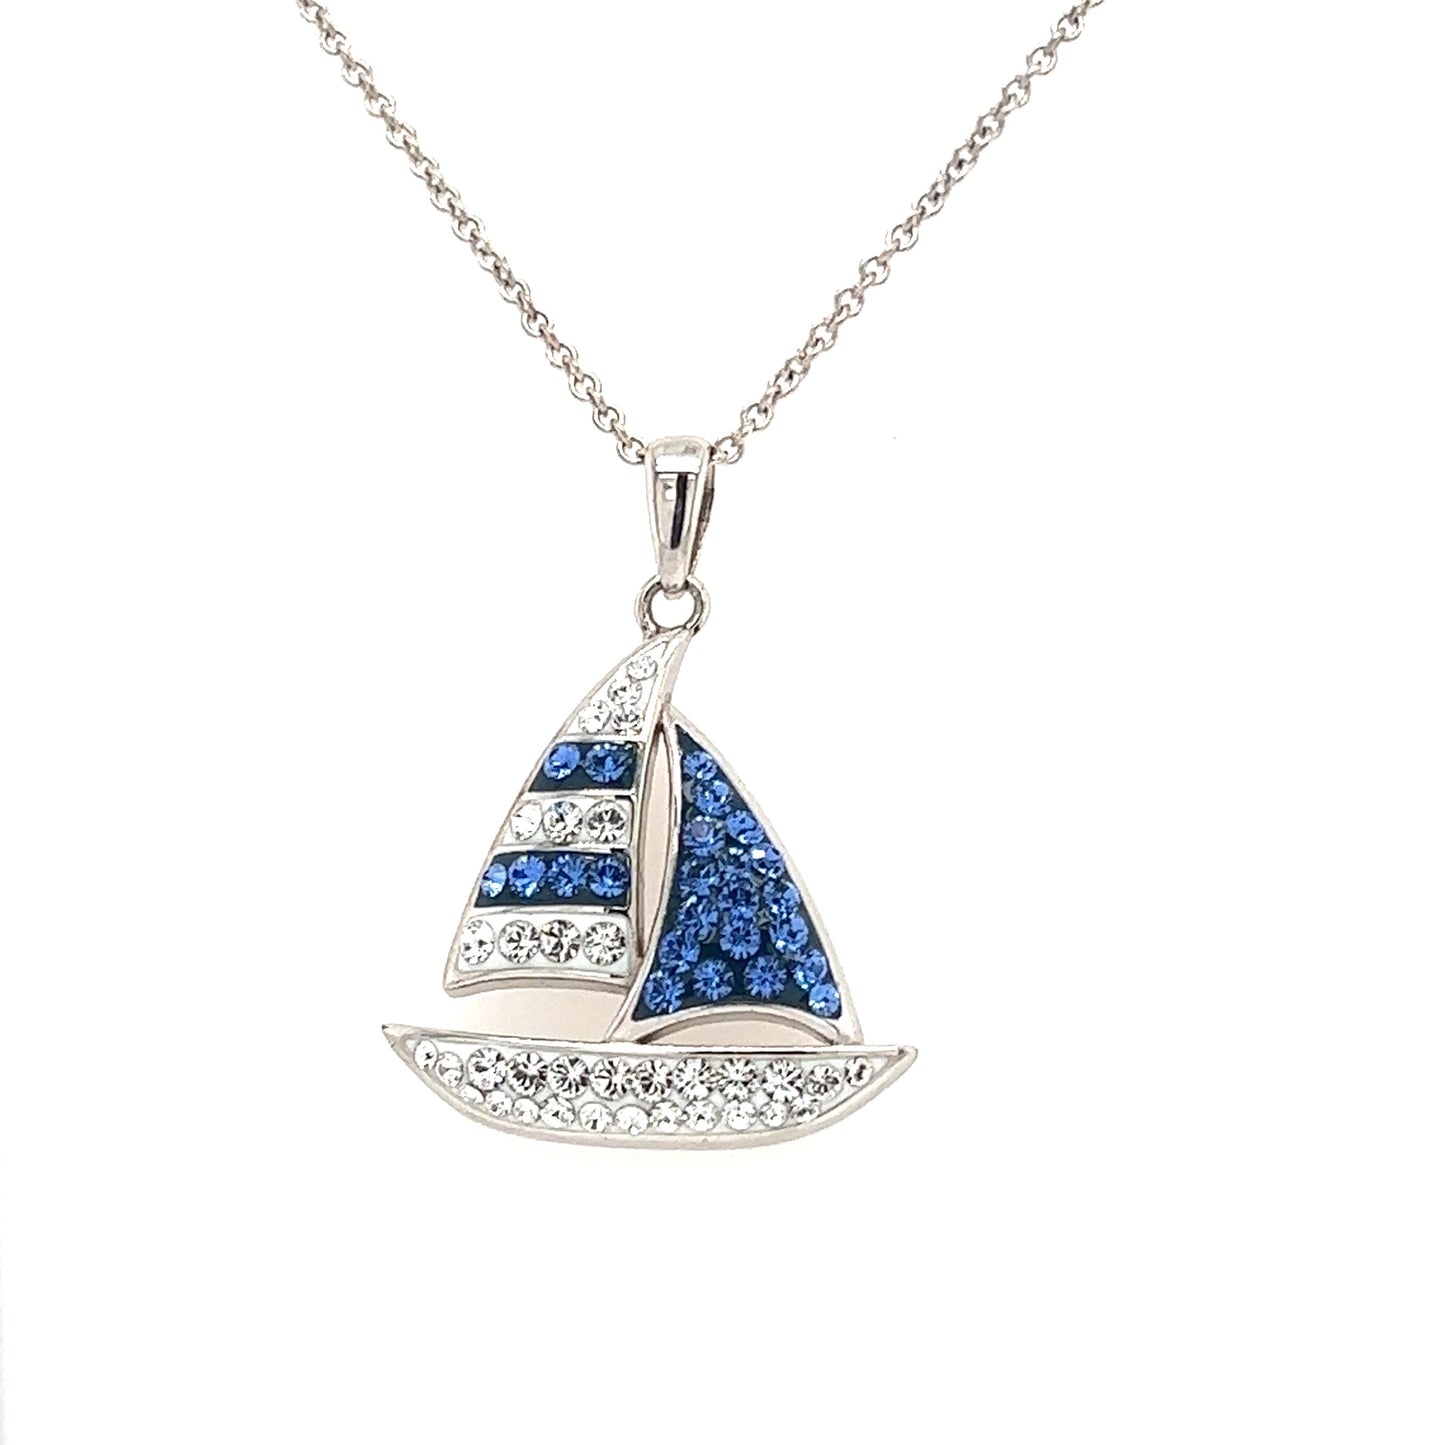 Blue Sailboat Necklace with Blue and White Crystals in Sterling Silver. Pendant Front View